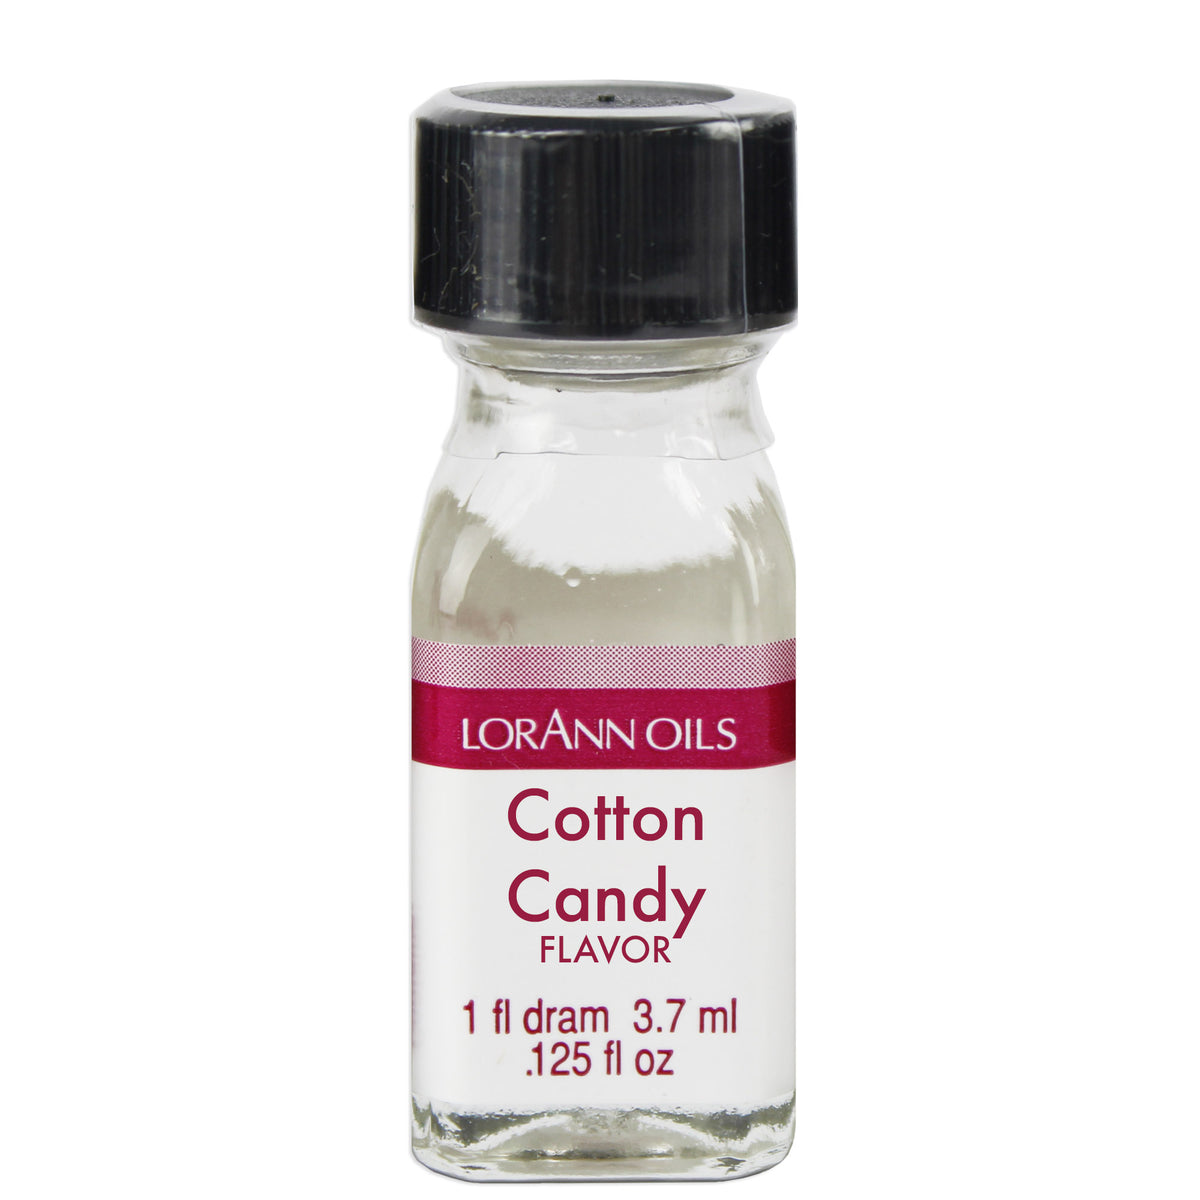 Cotton Candy Flavoring Oil